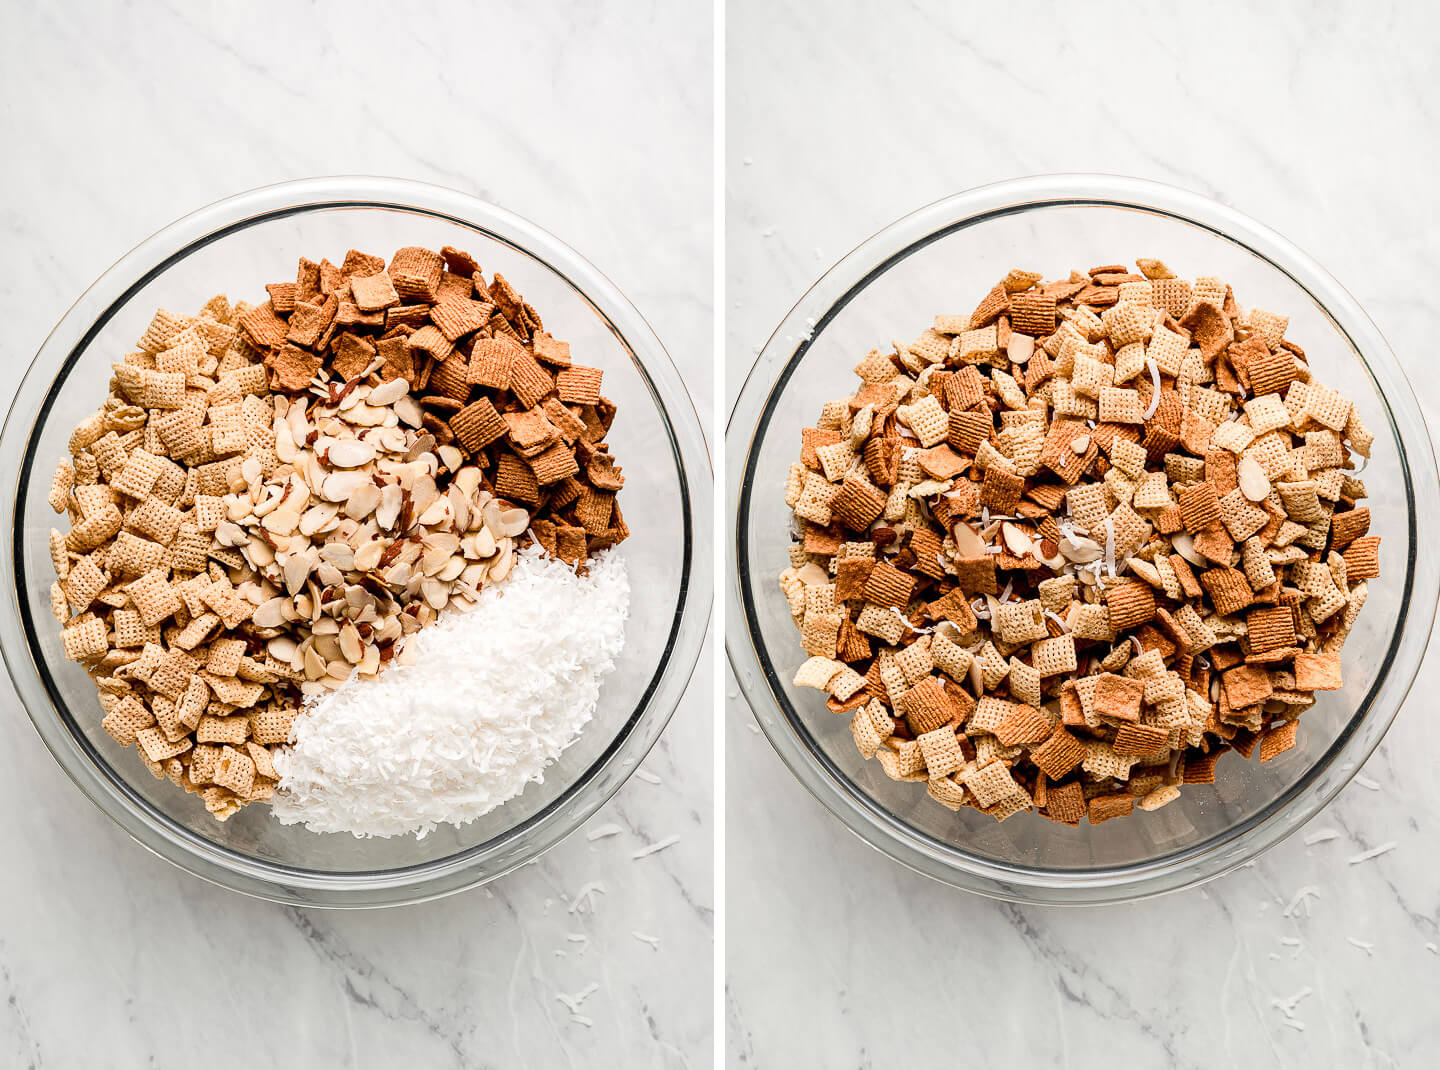 Diptych- Chex, Golden Grahams, coconut flakes, and sliced almonds in a large glass mixing bowl; all mixed together in a bowl.